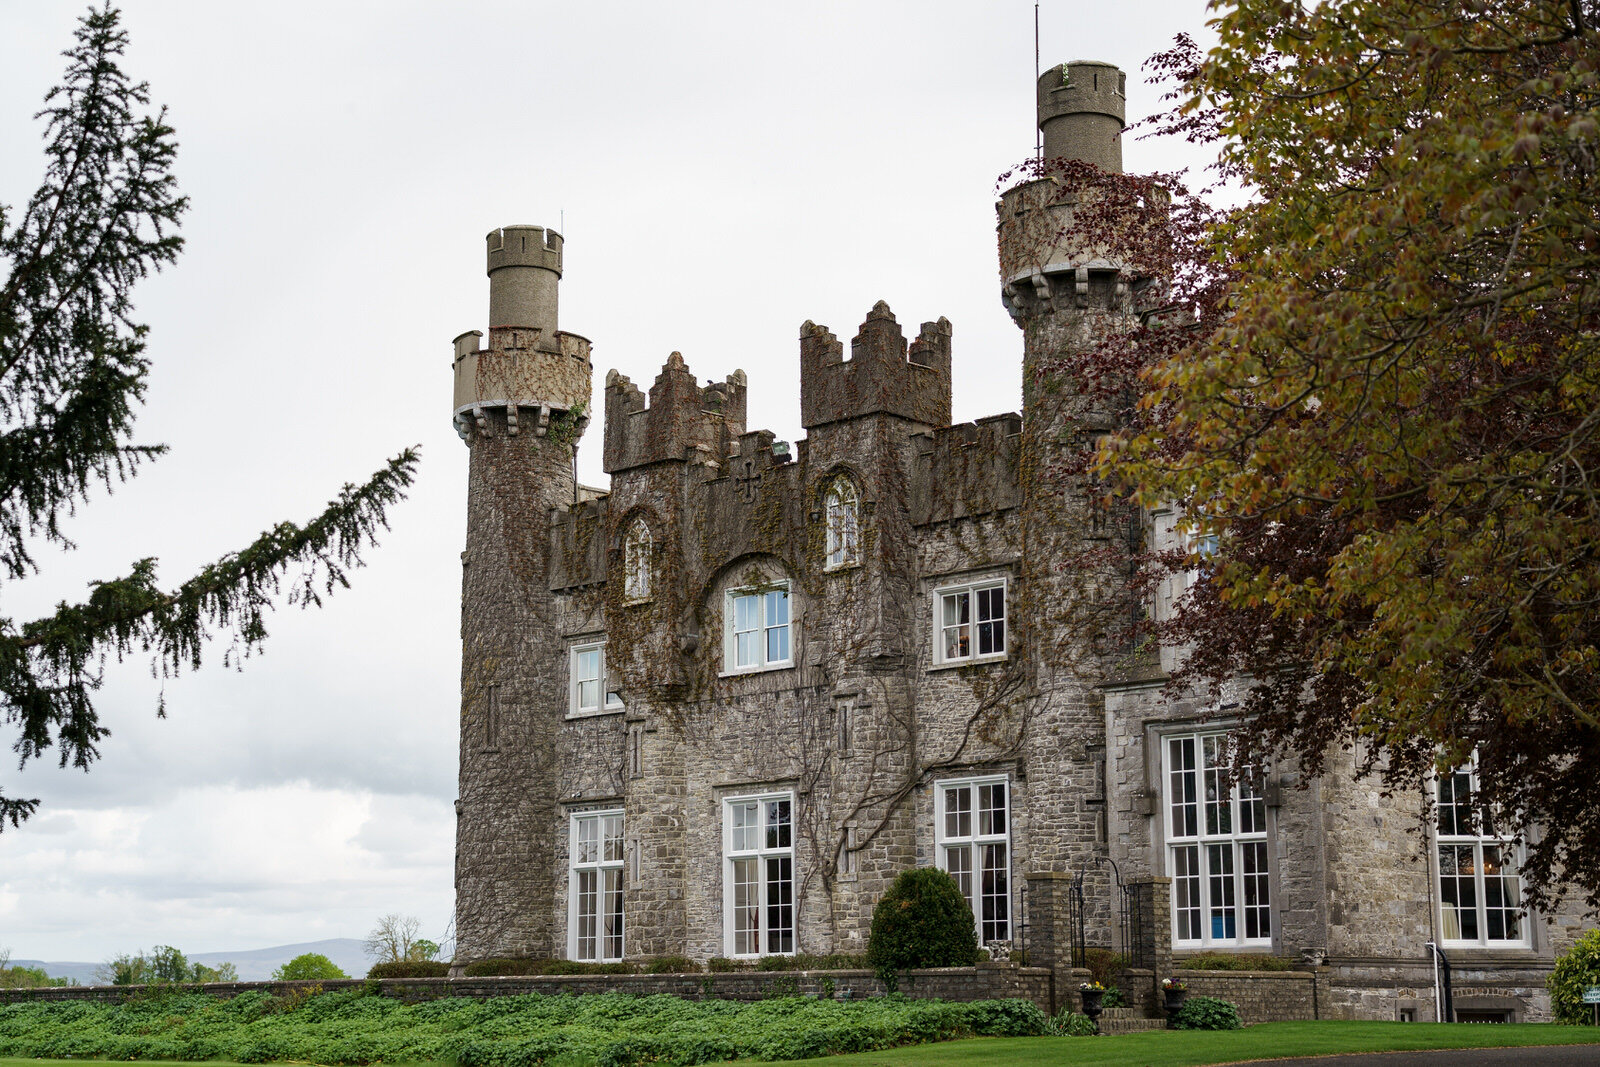  Luttrelstown Castle Dublin Ireland Incentive travel group photography by Roger Kenny 